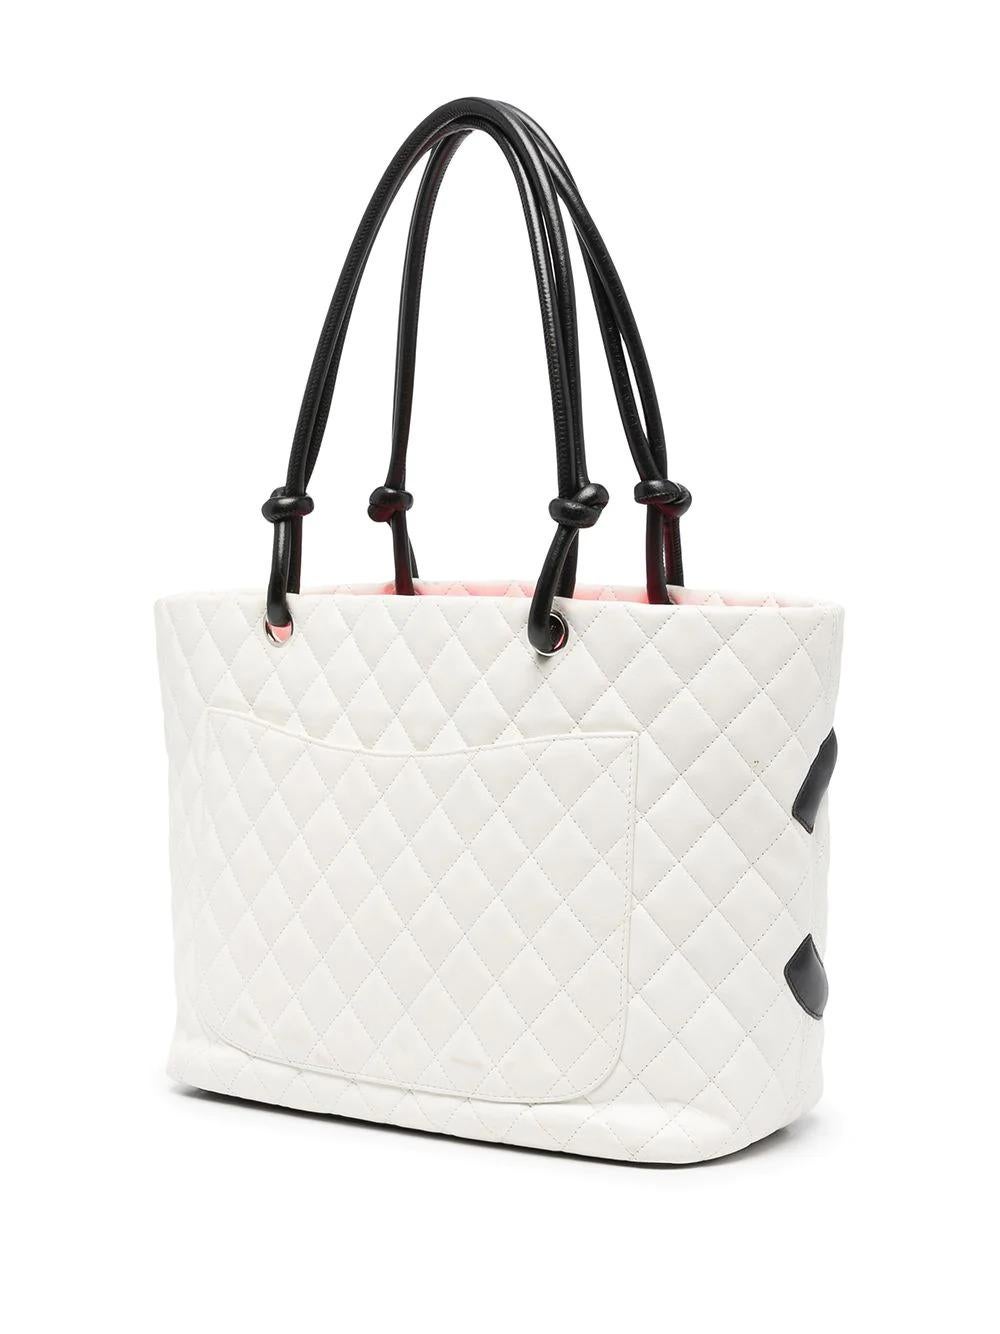 From the 2004-2005 Cambon Collection, this pre-owned Chanel tote bag is crafted from white quilted leather and displays a bold interlocking black CC logo. It features an exterior back slip pocket, dual-rolled black leather handles with knotted ends